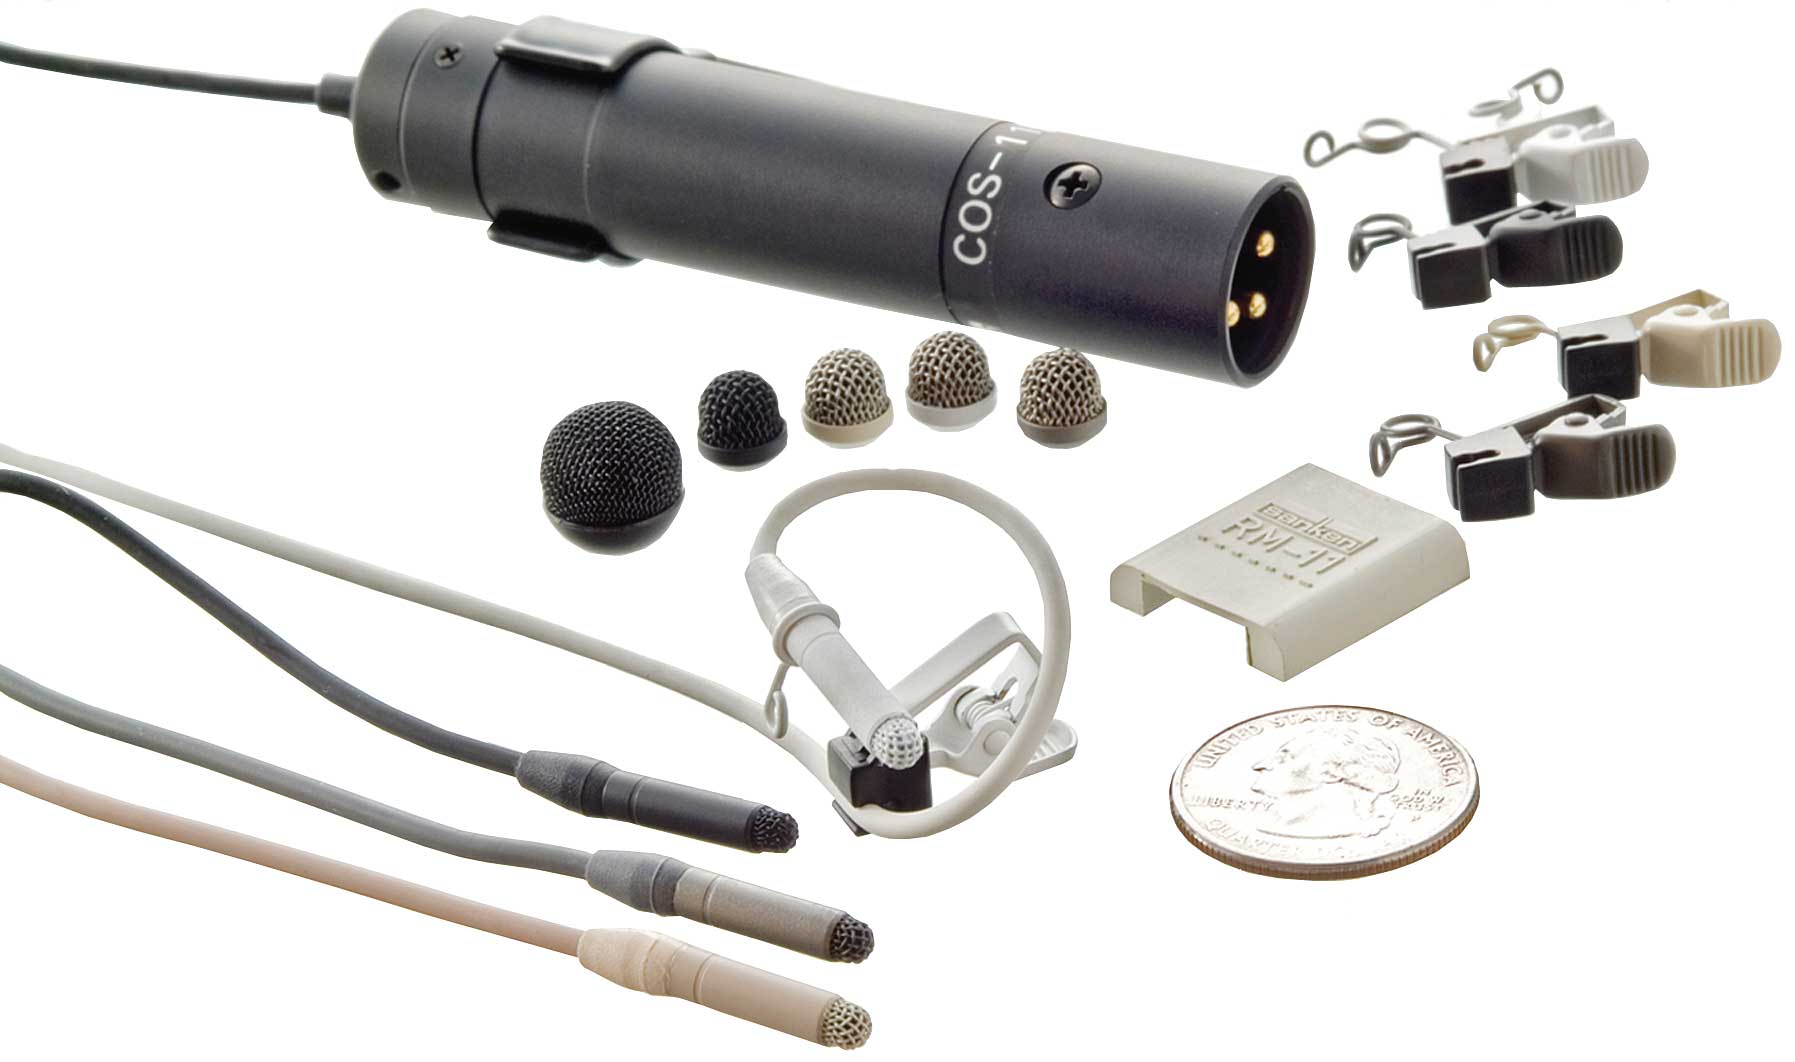 Point Source Audio CO-8WLh-KIT LAVALIER SWITCH KIT CO-8WLh Lav Mic with  Case, EMBRACE Earmounts, Shure Wireless Connector and Bonus TRRS Stereo  Connector, Black